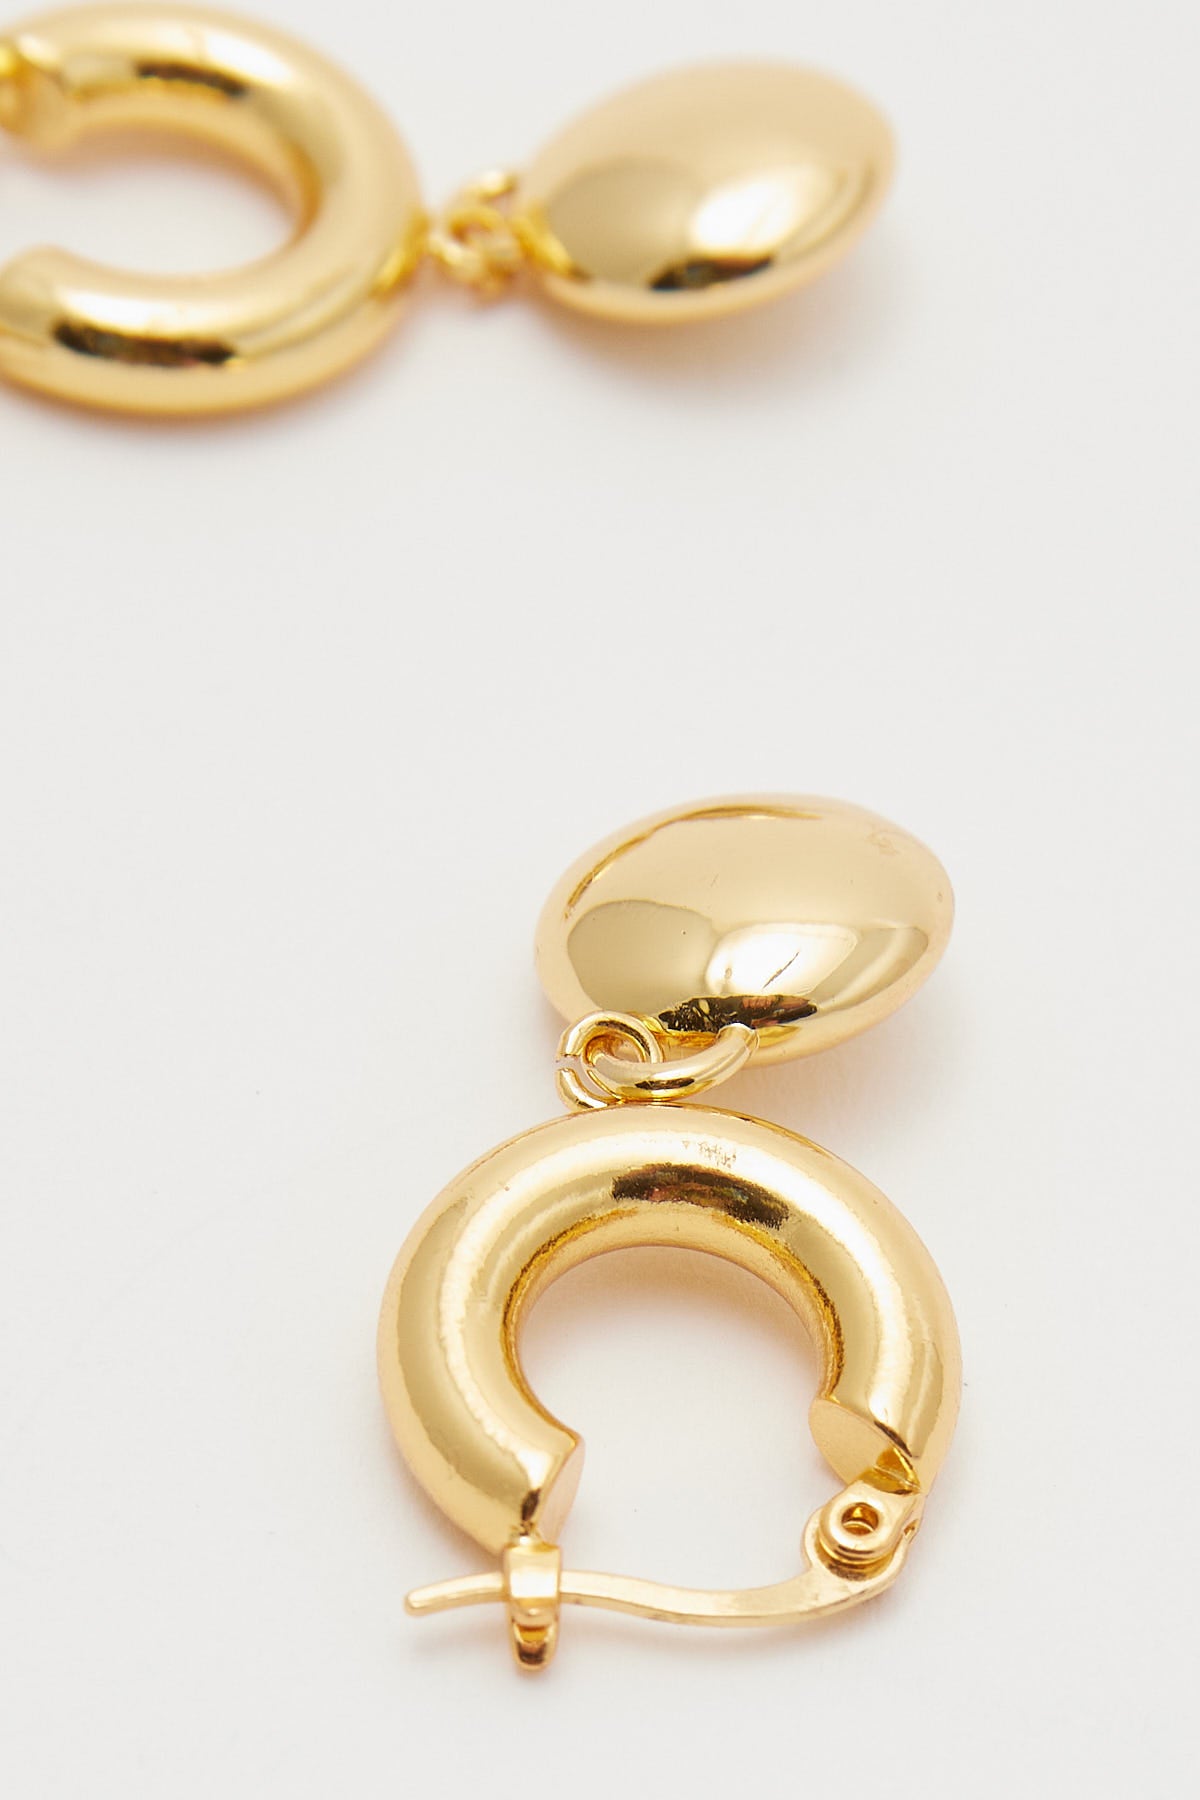 Perfect Stranger Grecia Earring 18k Gold Plated 18K Gold Plated